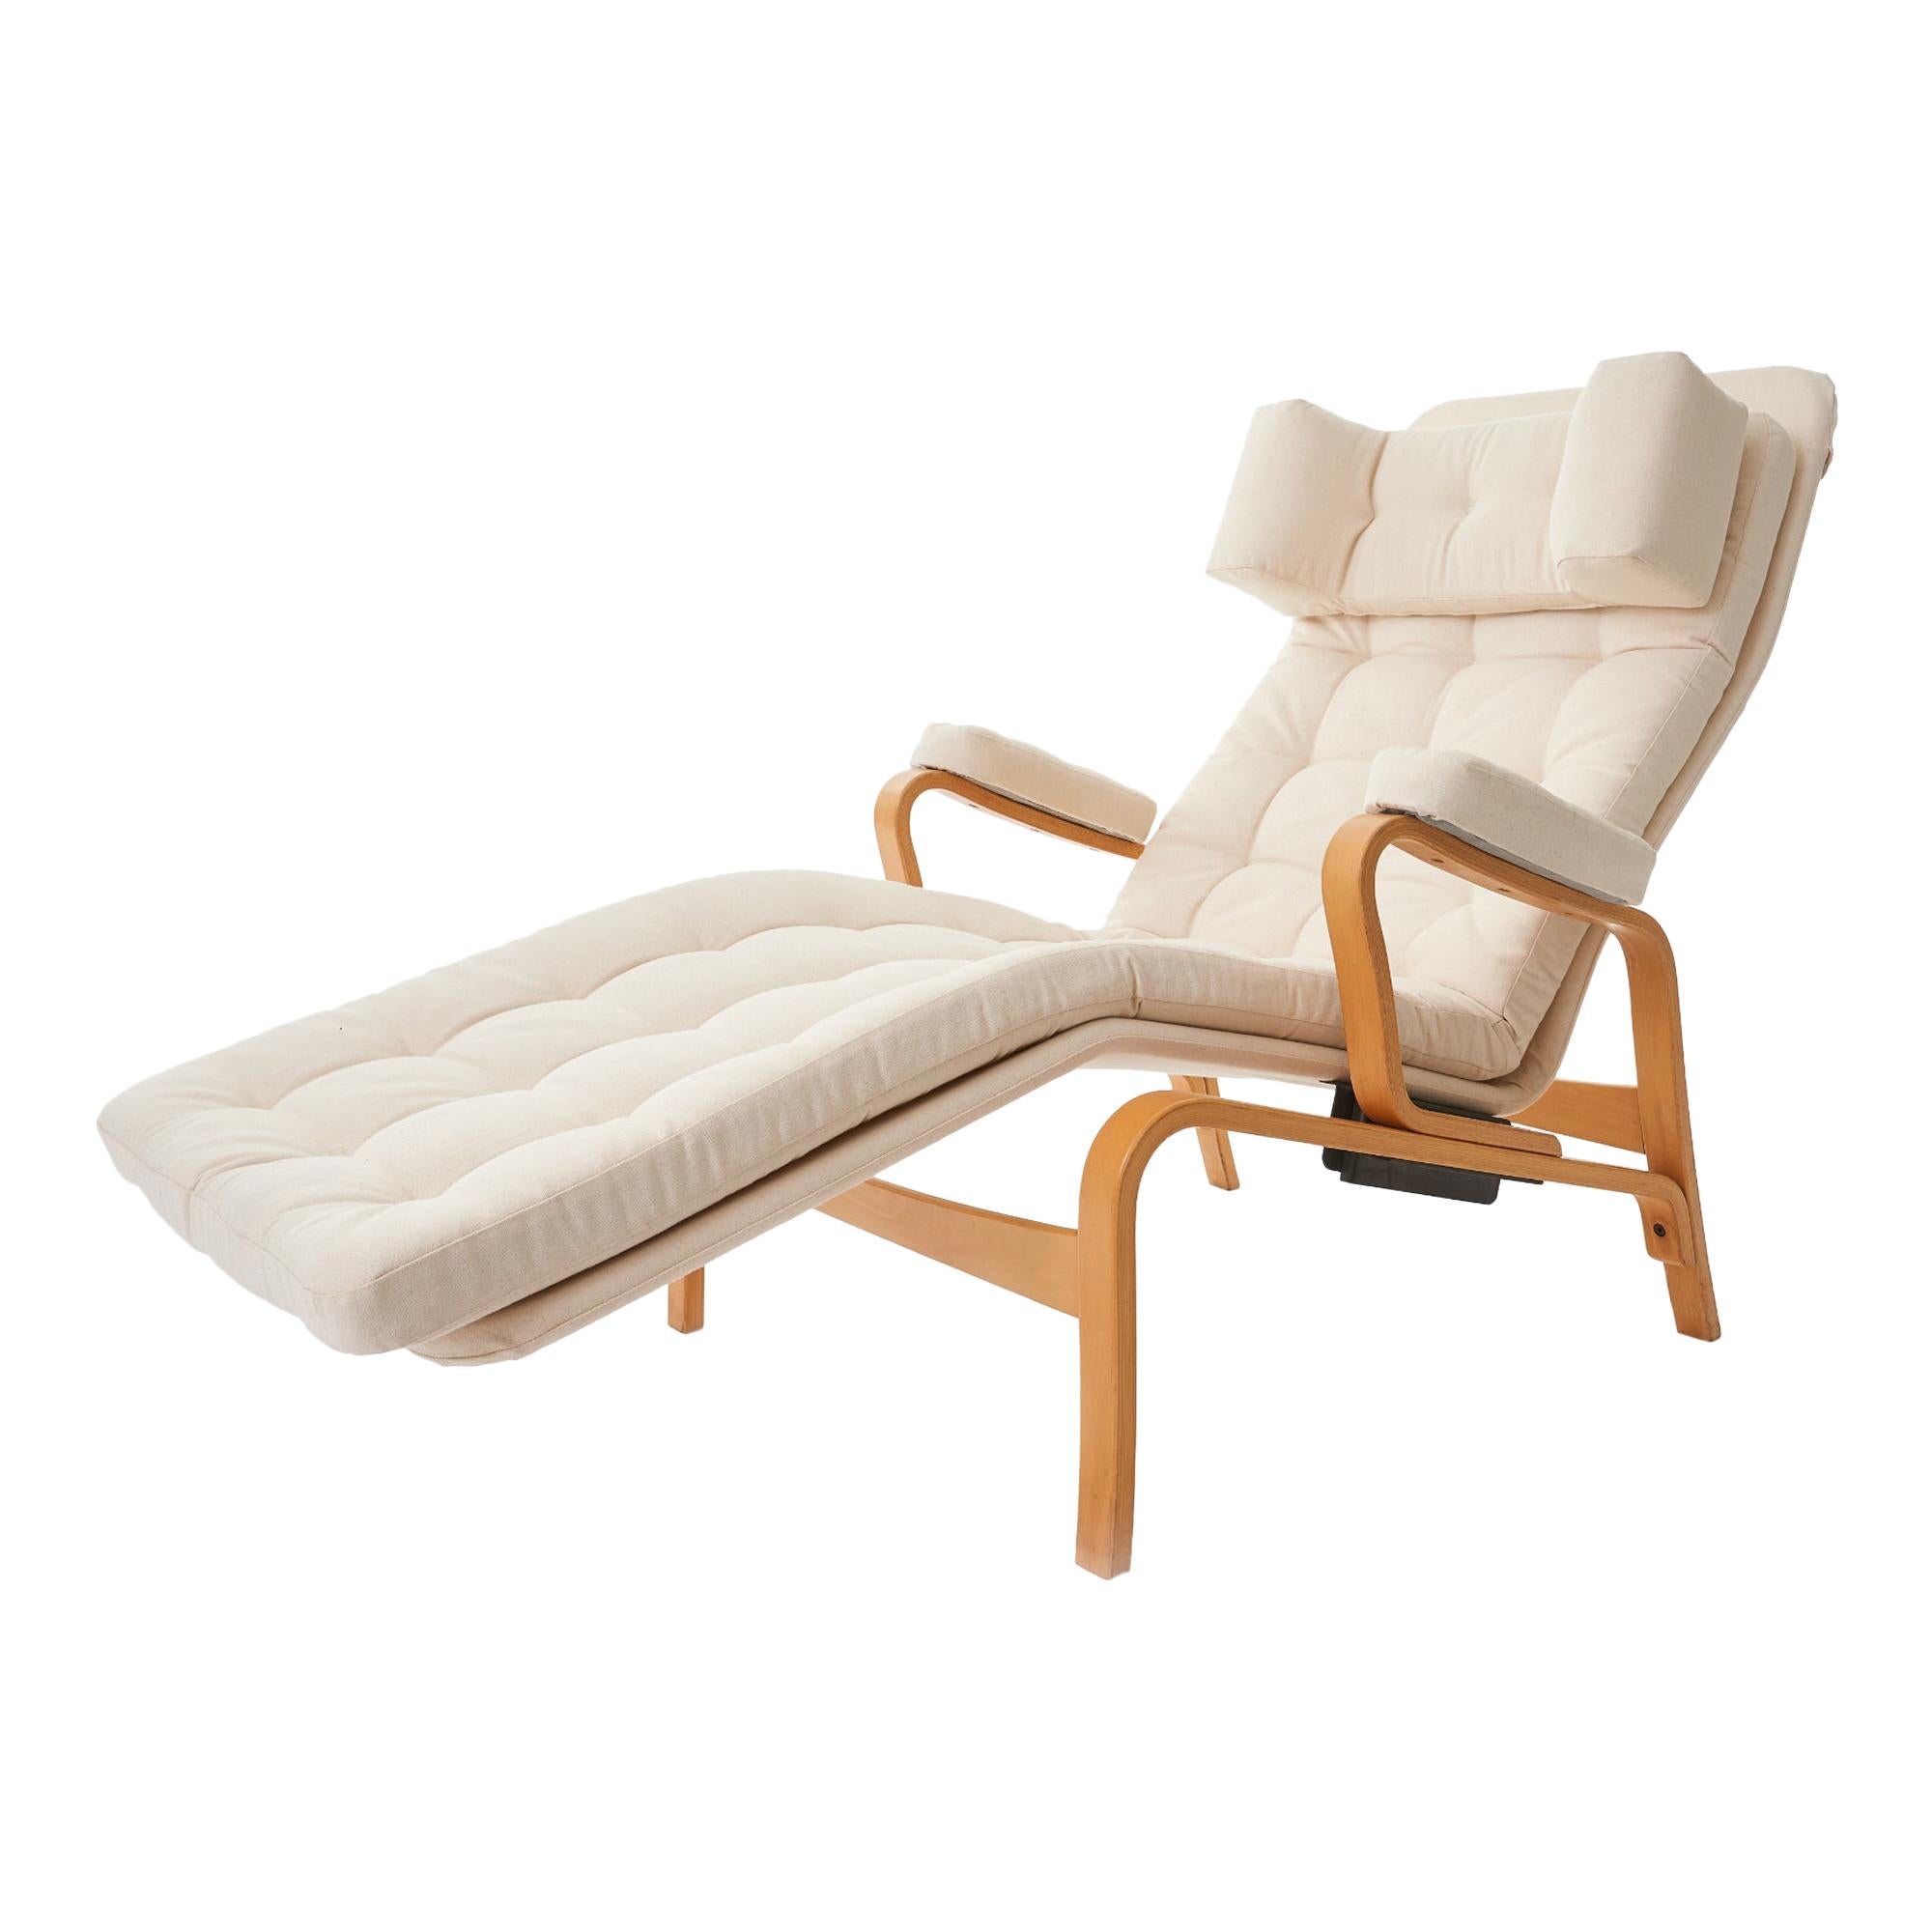 1970's 'Fenix' by Sam Larsson for DUX Reclining Bentwood Lounge Chair